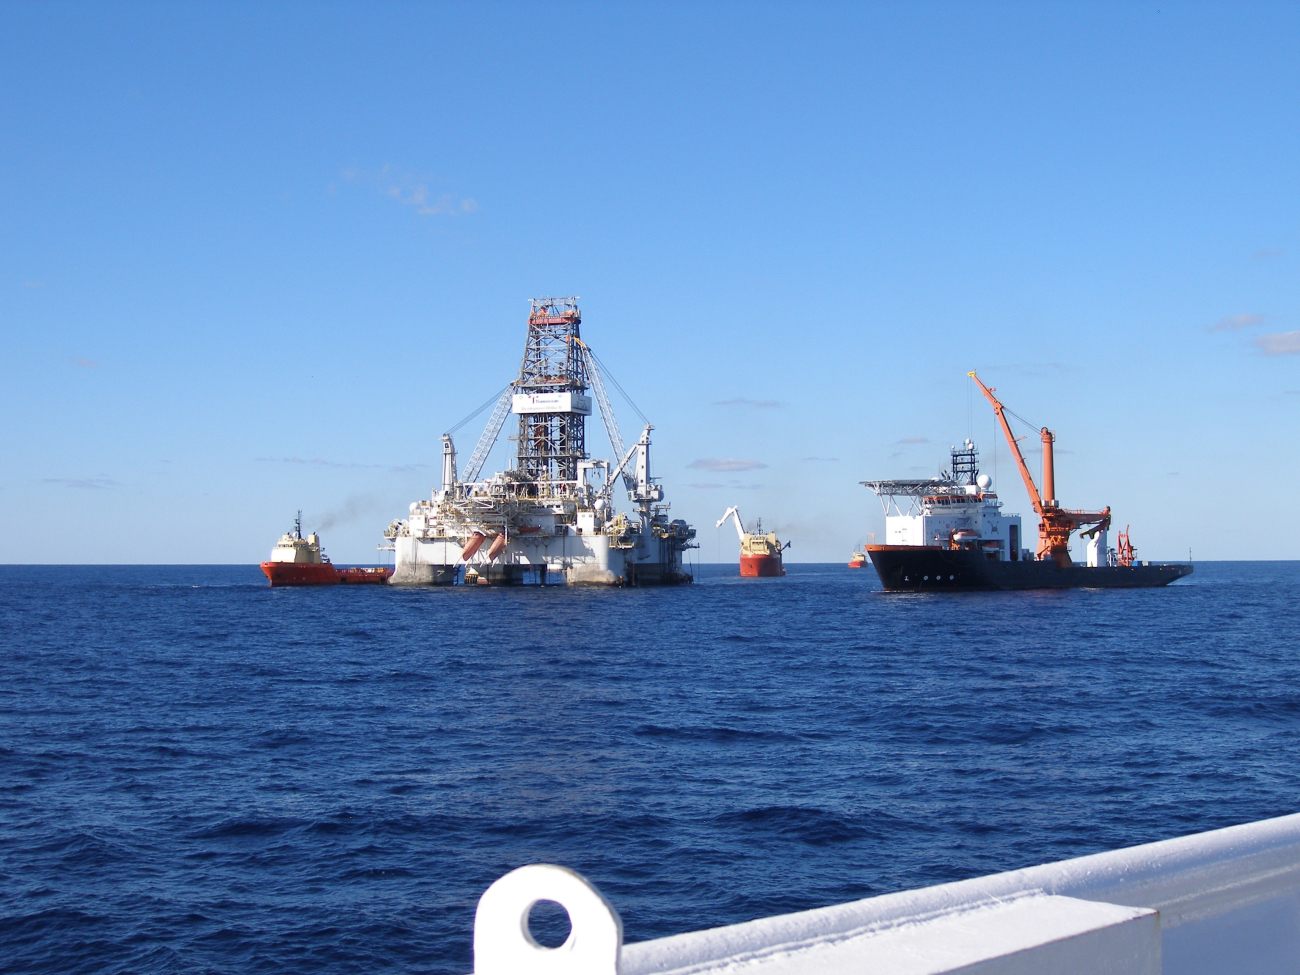 Drill rigs and work vessels on-site at the Deepwater Horizon disaster location